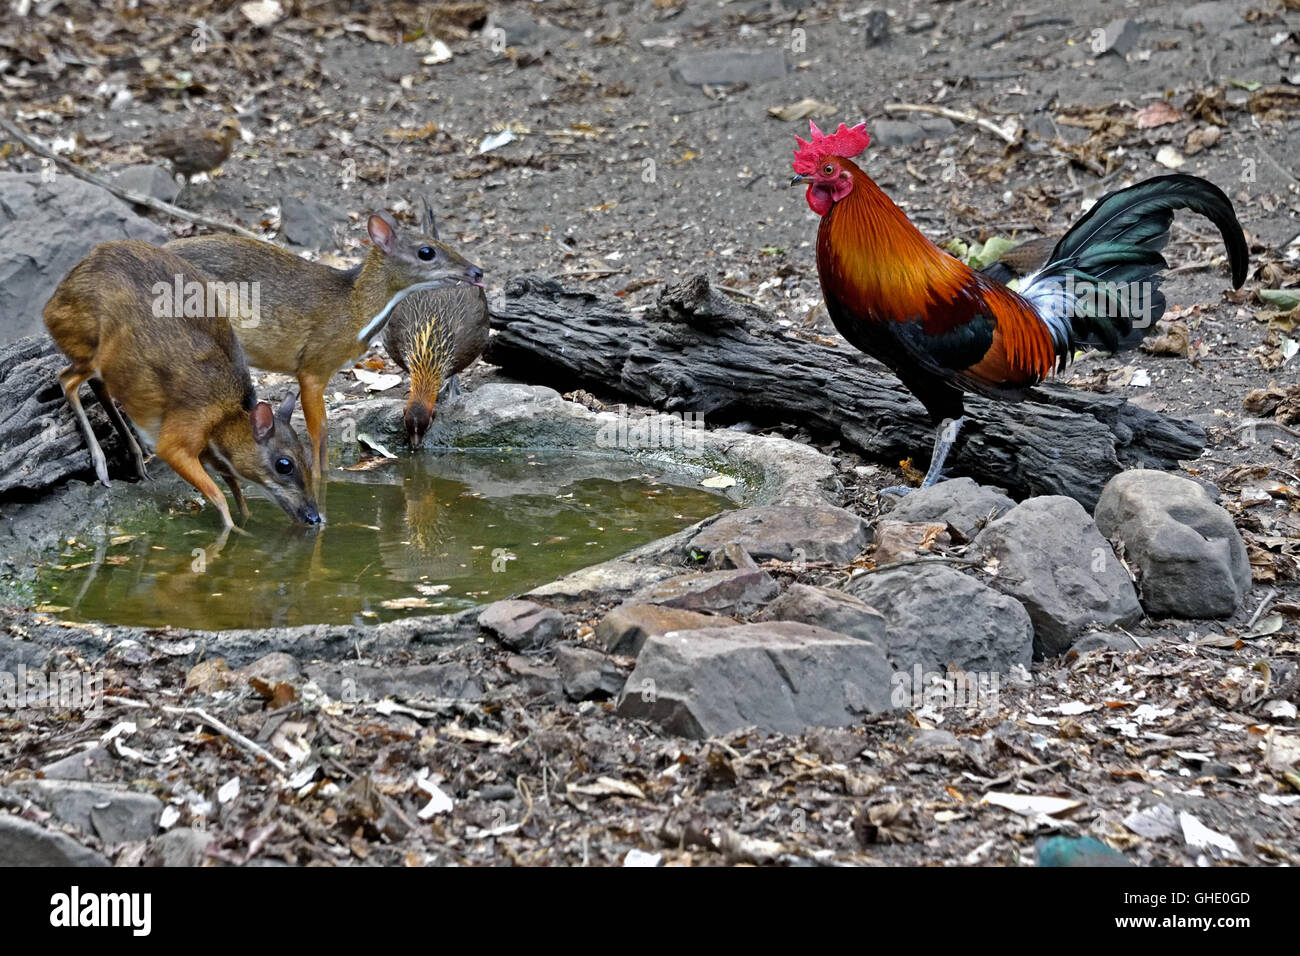 A Red Junglefowl (Gallus gallus spadiceus) pair with two Lesser Mousedeer at a waterhole in the Thai forest Stock Photo